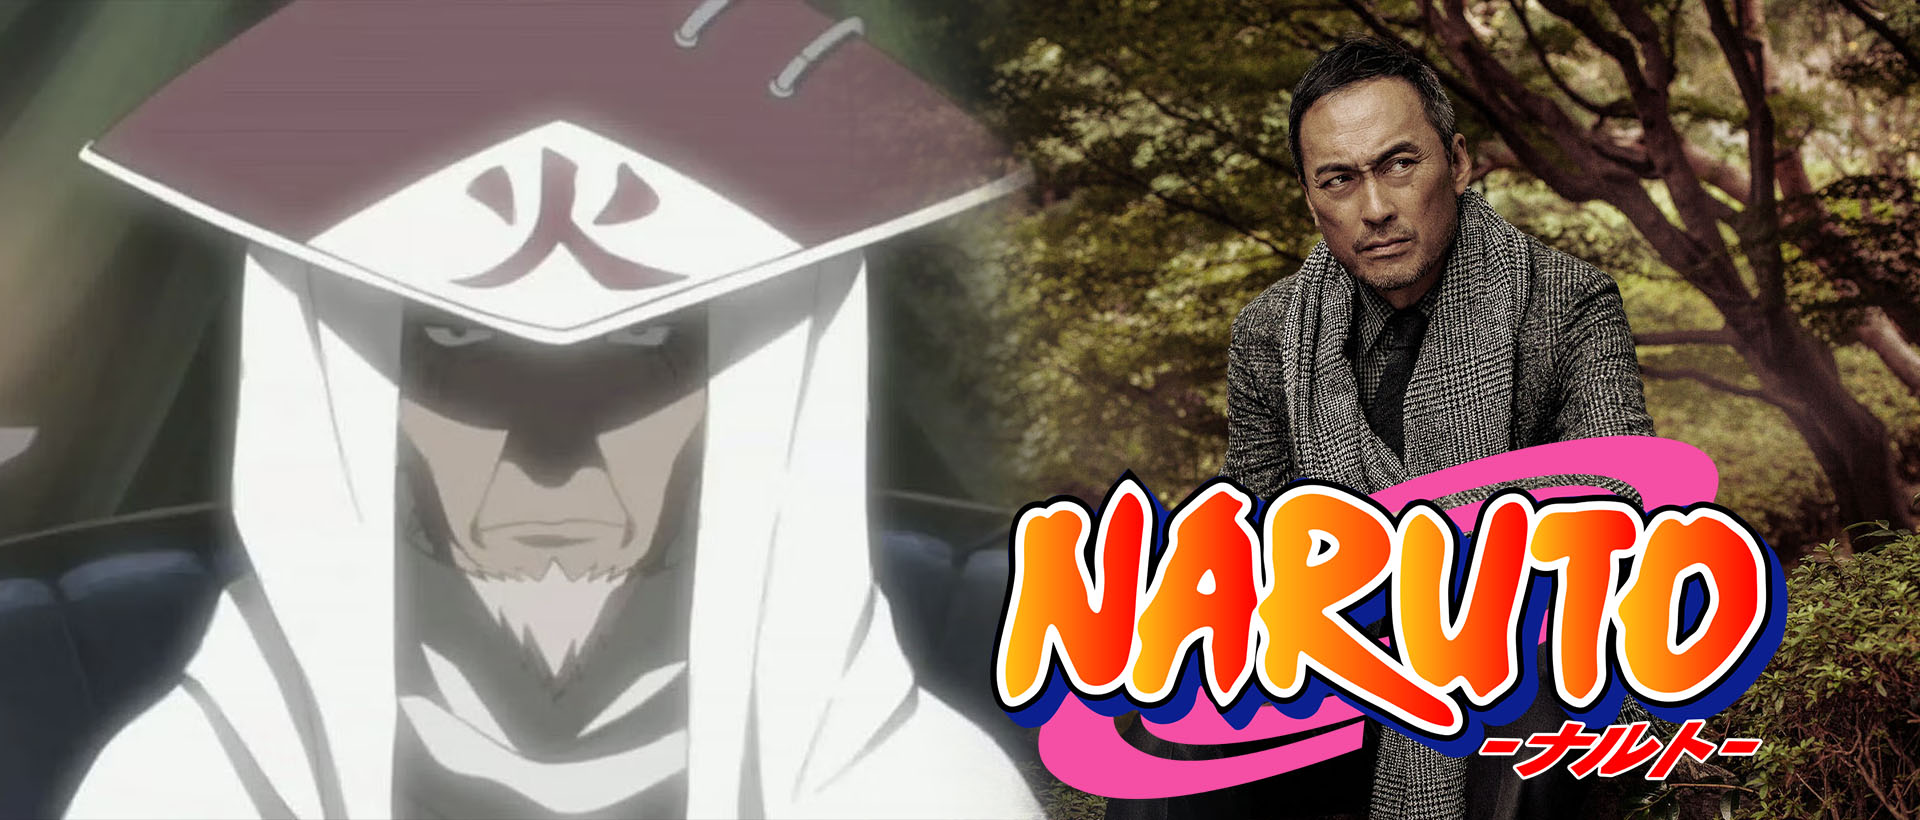 Lionsgate Courting Ken Watanabe For Their 'Naruto' Live-Action Movie -  Knight Edge Media